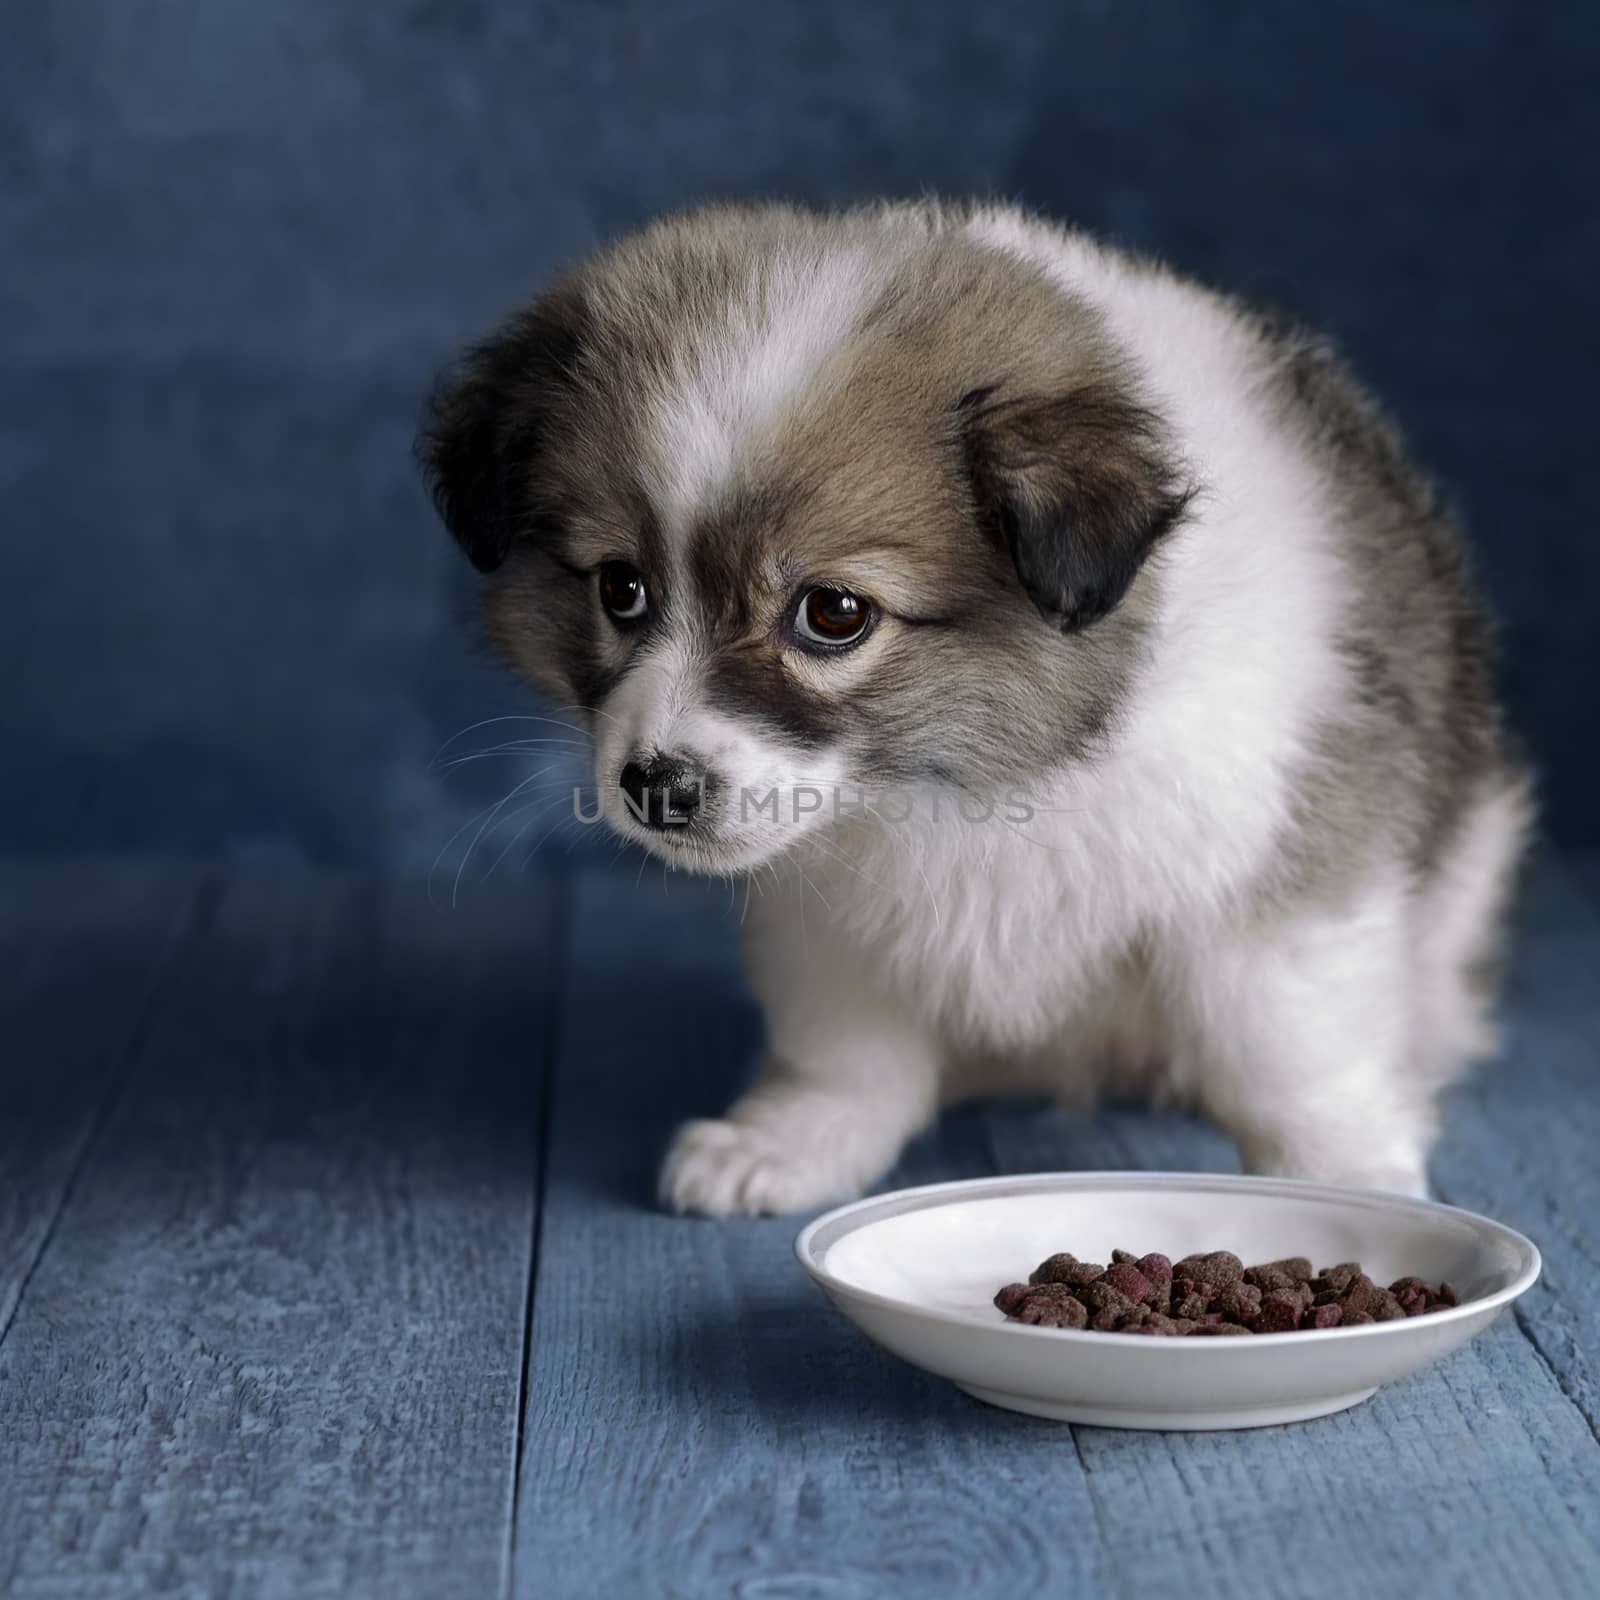 Small fluffy puppy sits next to a plate of food, on a blue background. by Gaina